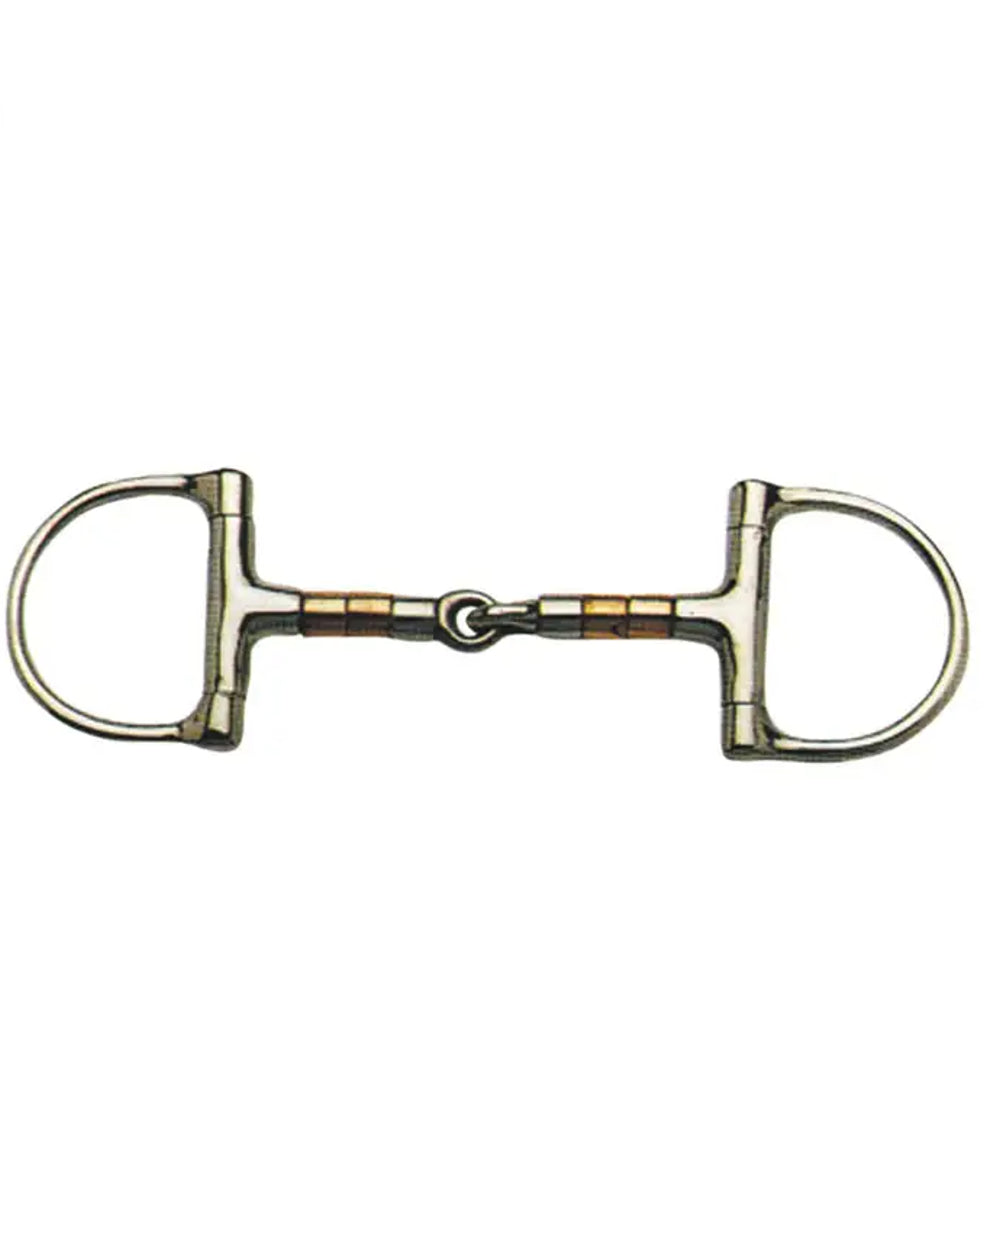 Korsteel Stainless Steel Copper &amp; Steel Rollers Jointed Dee Ring Snaffle Bit on white background